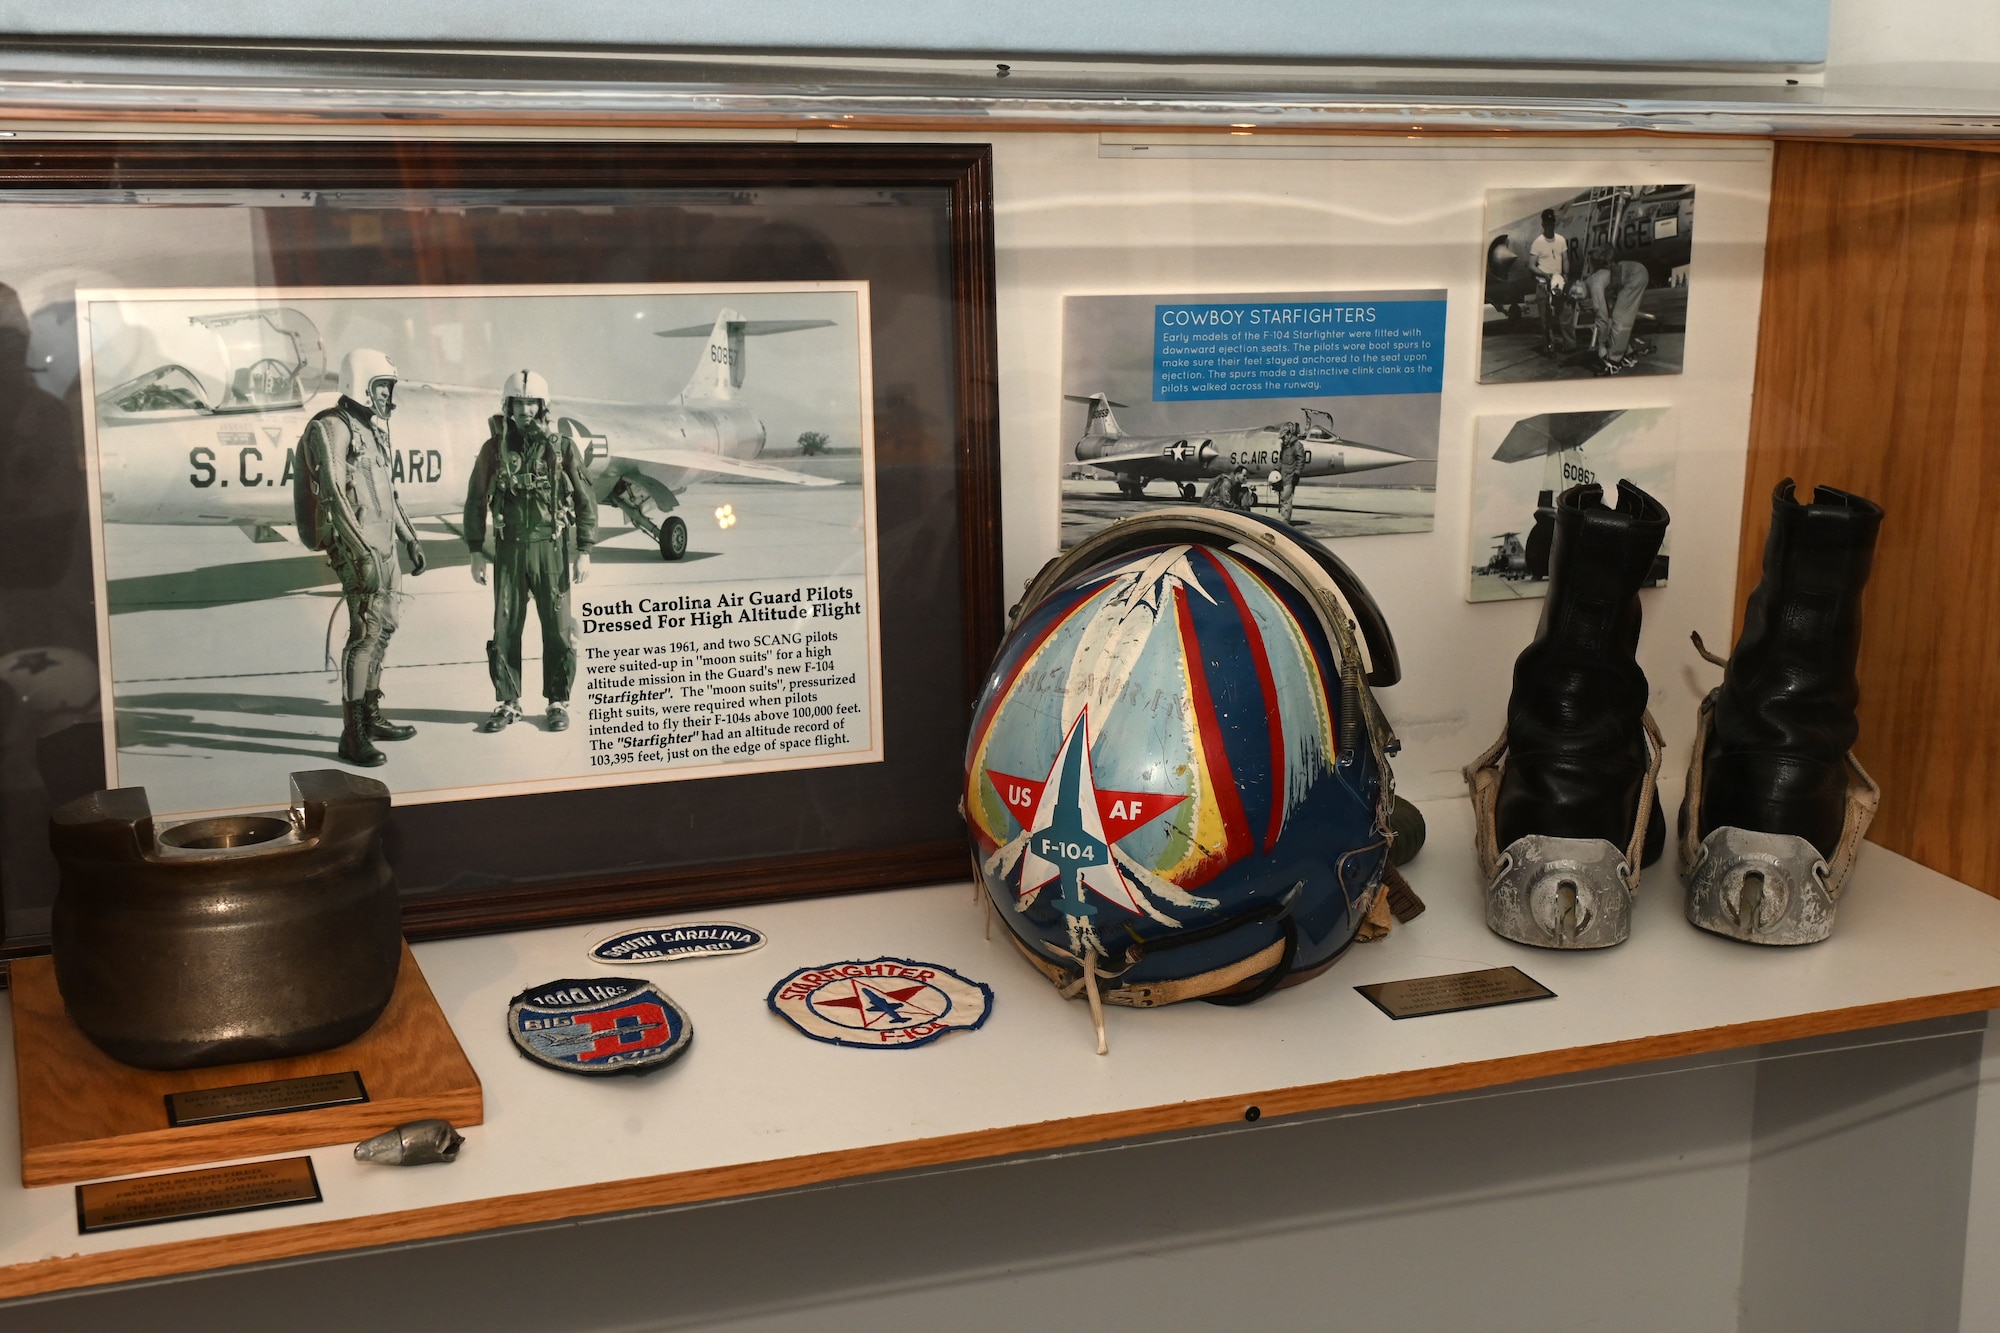 Artifact displays at the South Carolina Military Museum, Columbia, South Carolina, showcases the history from all branches of the South Carolina Military Department, September 26, 2022. The museum also hosts community events to preserve South Carolina’s military heritage and significance to the continuous defense of American democracy. (U.S. Air National Guard photo by Airman 1st Class Amy Rangel, 169th Fighter Wing Public Affairs)